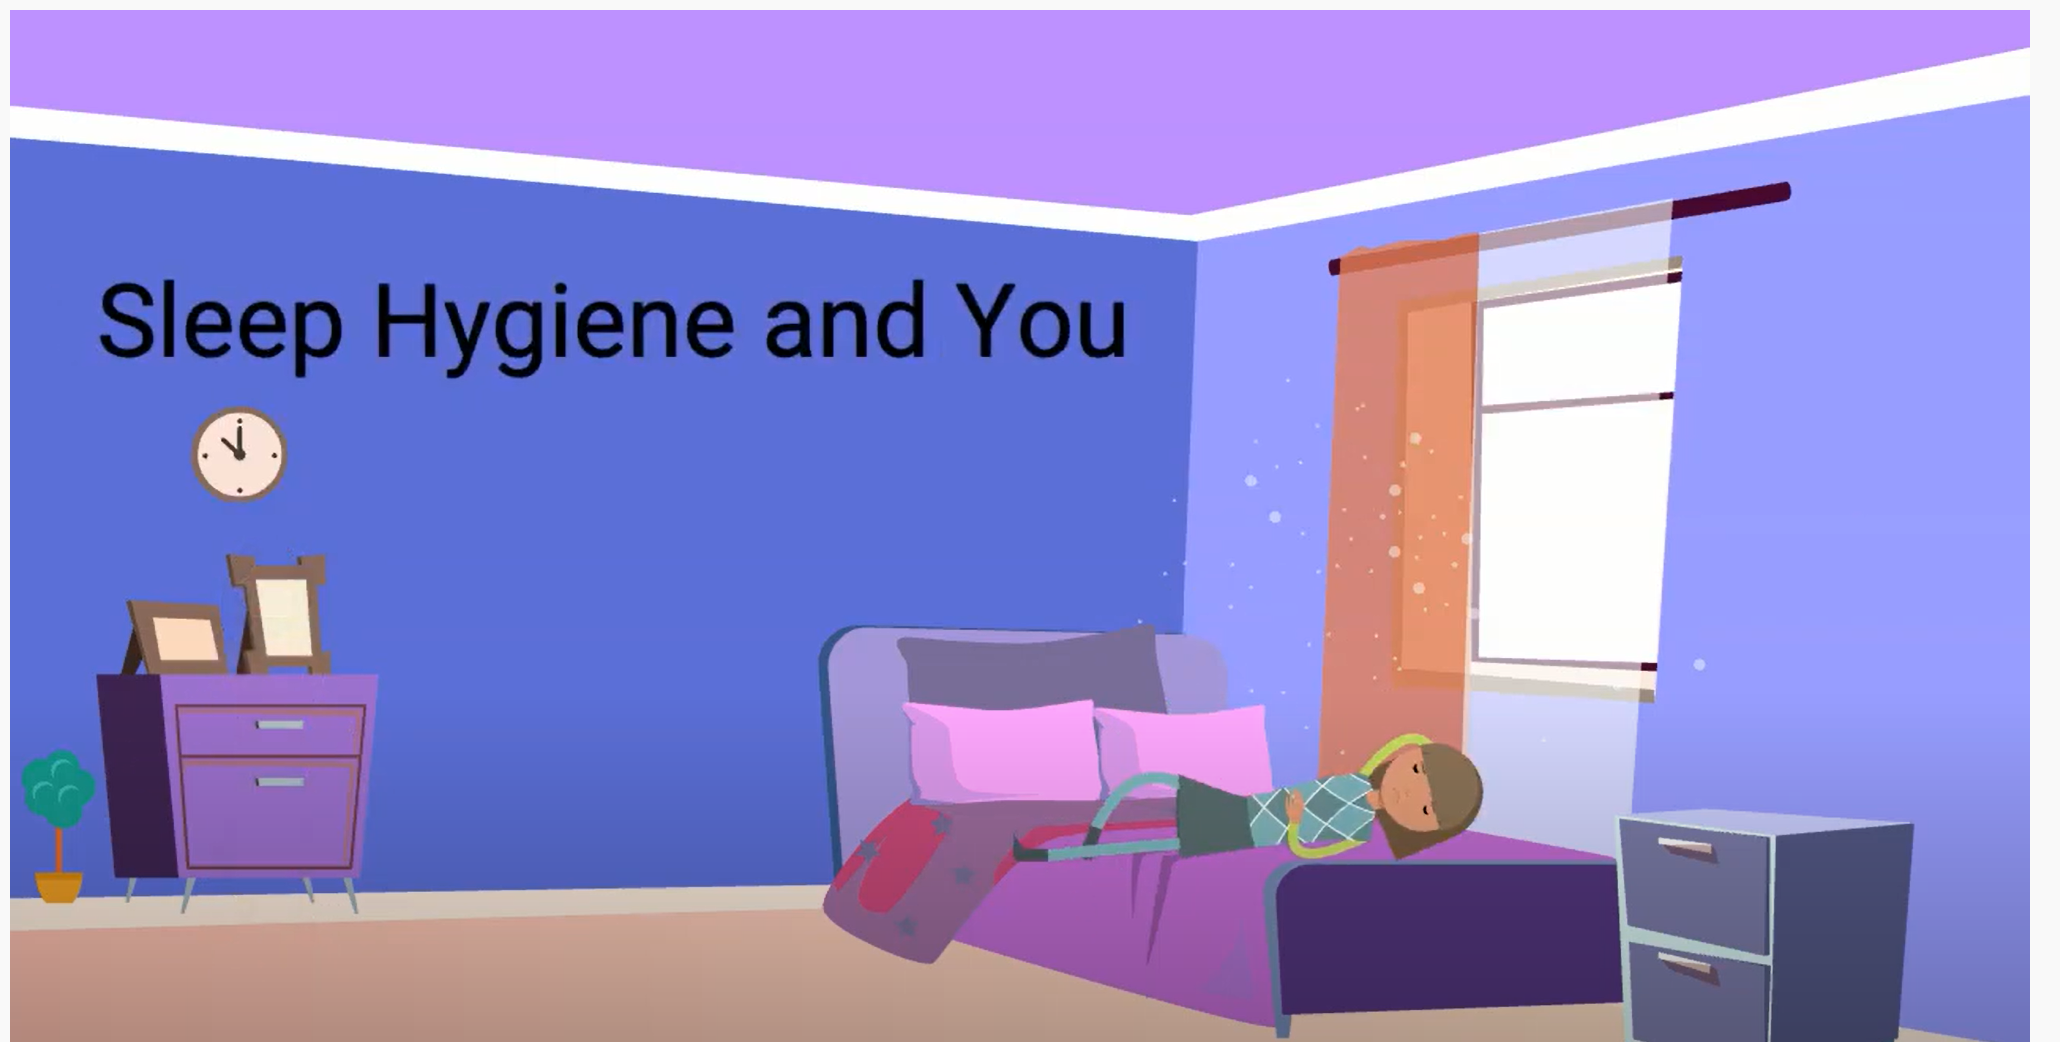 Girl lying on her bed with the words "sleep hygiene and you" in the background